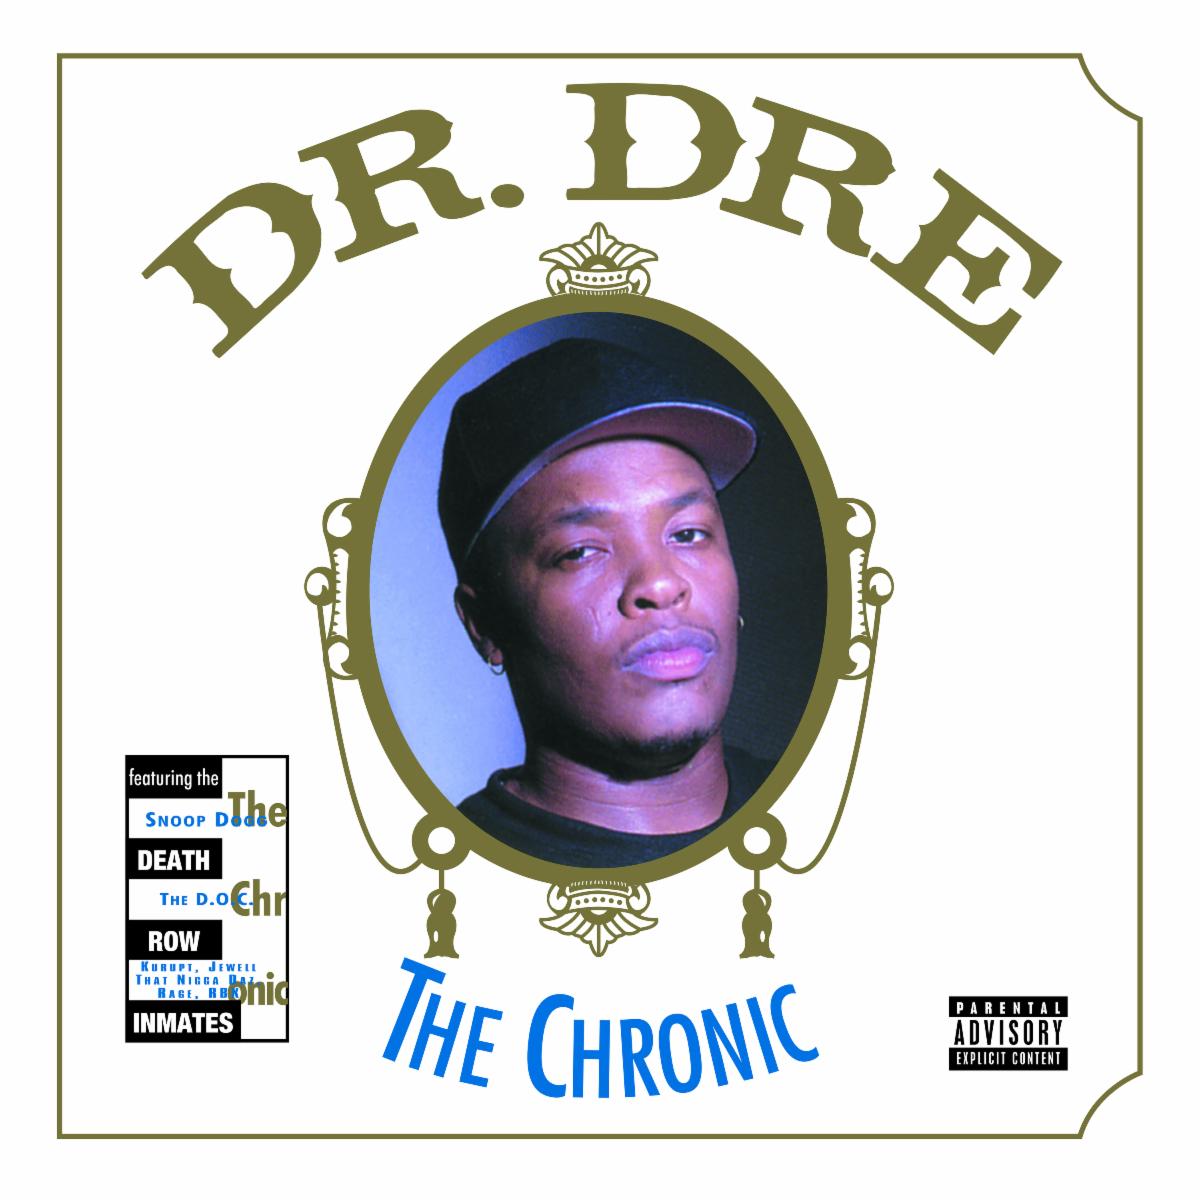 DR. DRE’S MAGNUM OPUS ‘THE CHRONIC’ CELEBRATES ITS 30TH ANNIVERSARY WITH FEBRUARY 1ST RETURN TO STREAMING SERVICES VIA INTERSCOPE RECORDS, THE ALBUM’S ORIGINAL DISTRIBUTOR